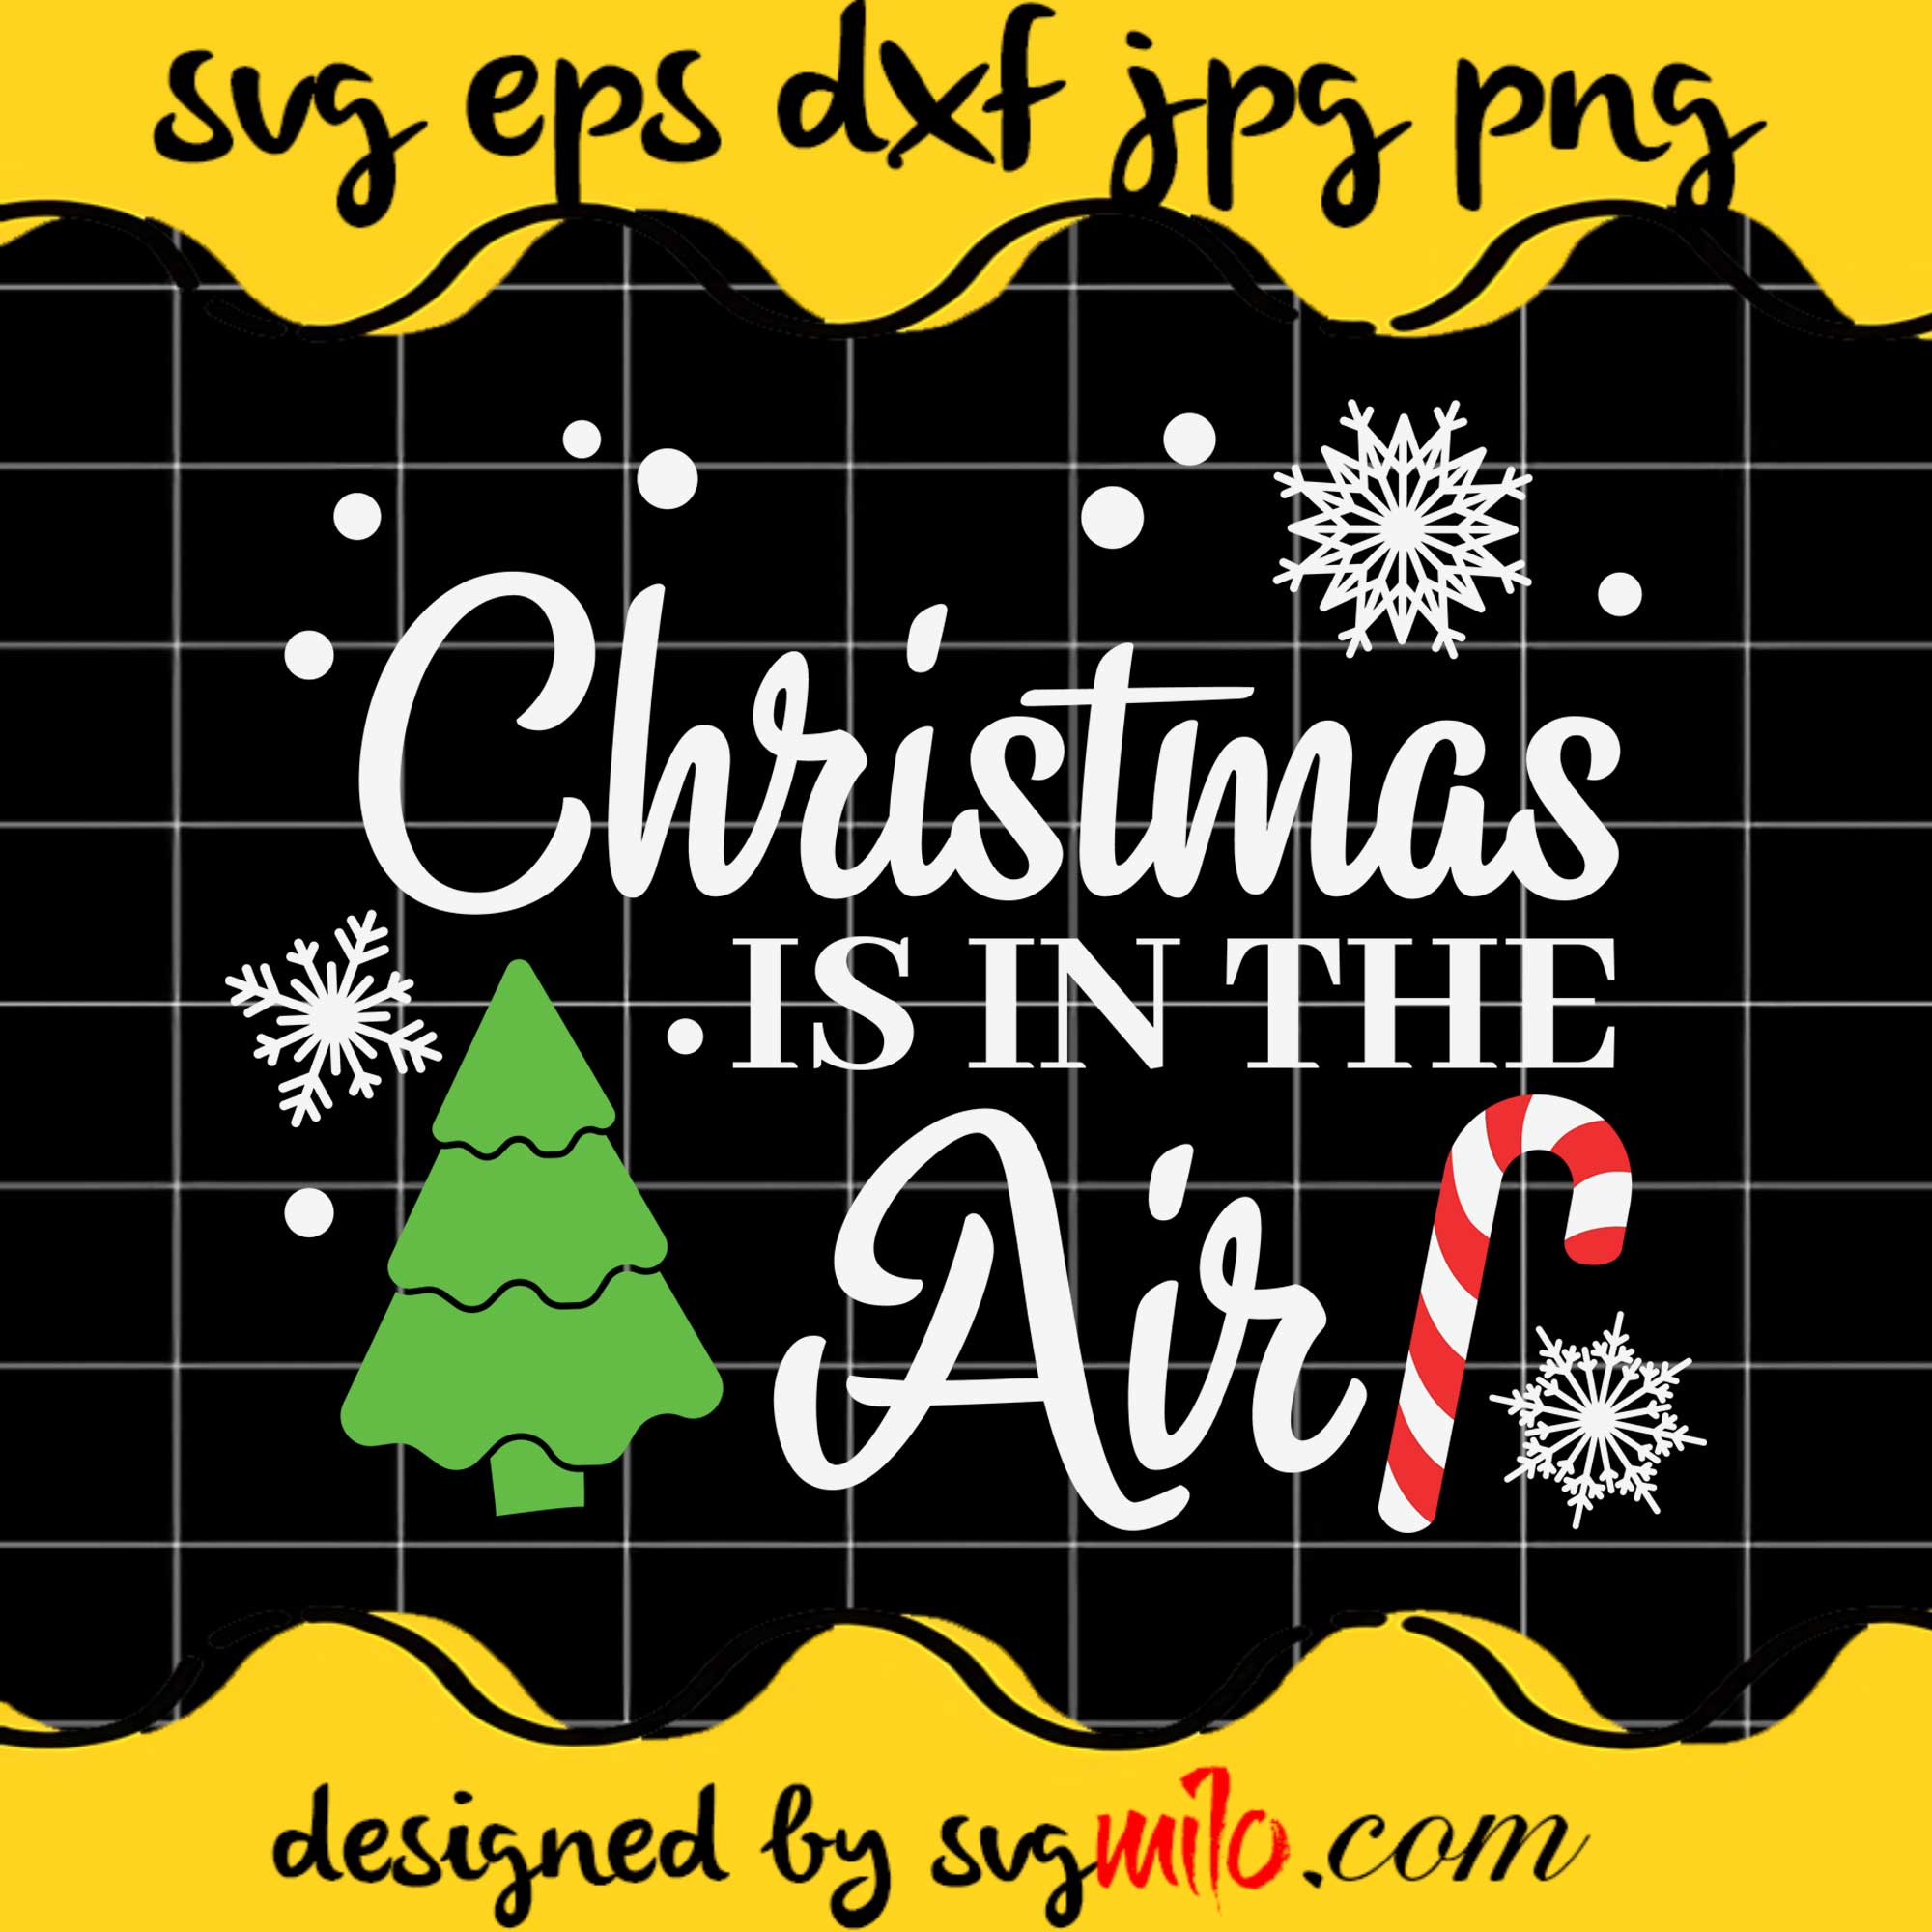 Christmas Is In The Air Cricut cut file, Silhouette cutting file,Premium Quality SVG - SVGMILO